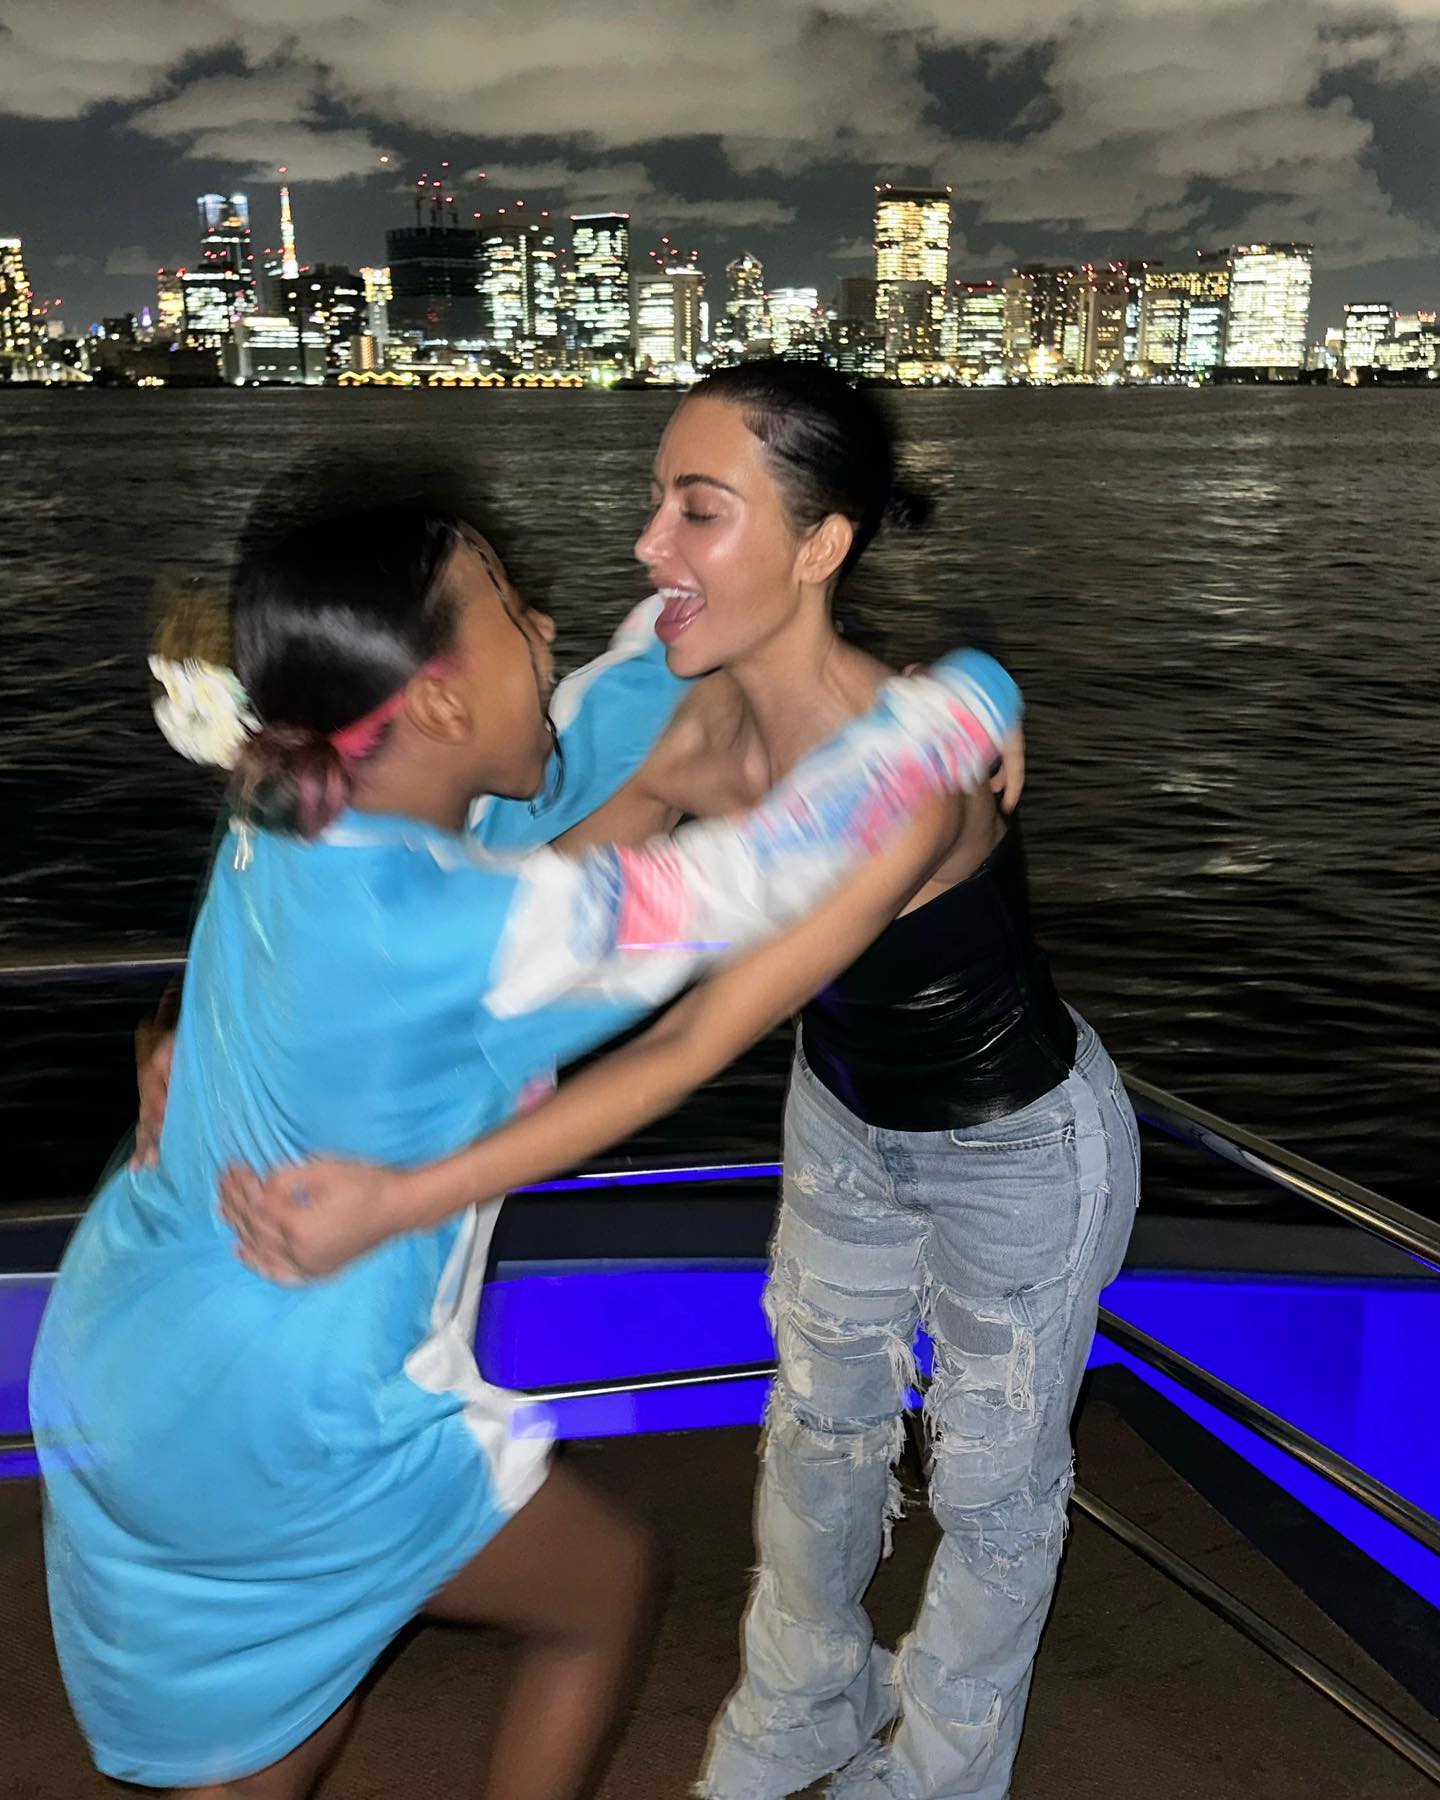 likhoa kim kardashian shares an exciting moment with her daughter north west on a private multi million dollar yacht 652a5e26c0639 Kim Kardashian Shares An Exciting Moment With Her Daughter North West On A Private Multi-million Dollar Yacht